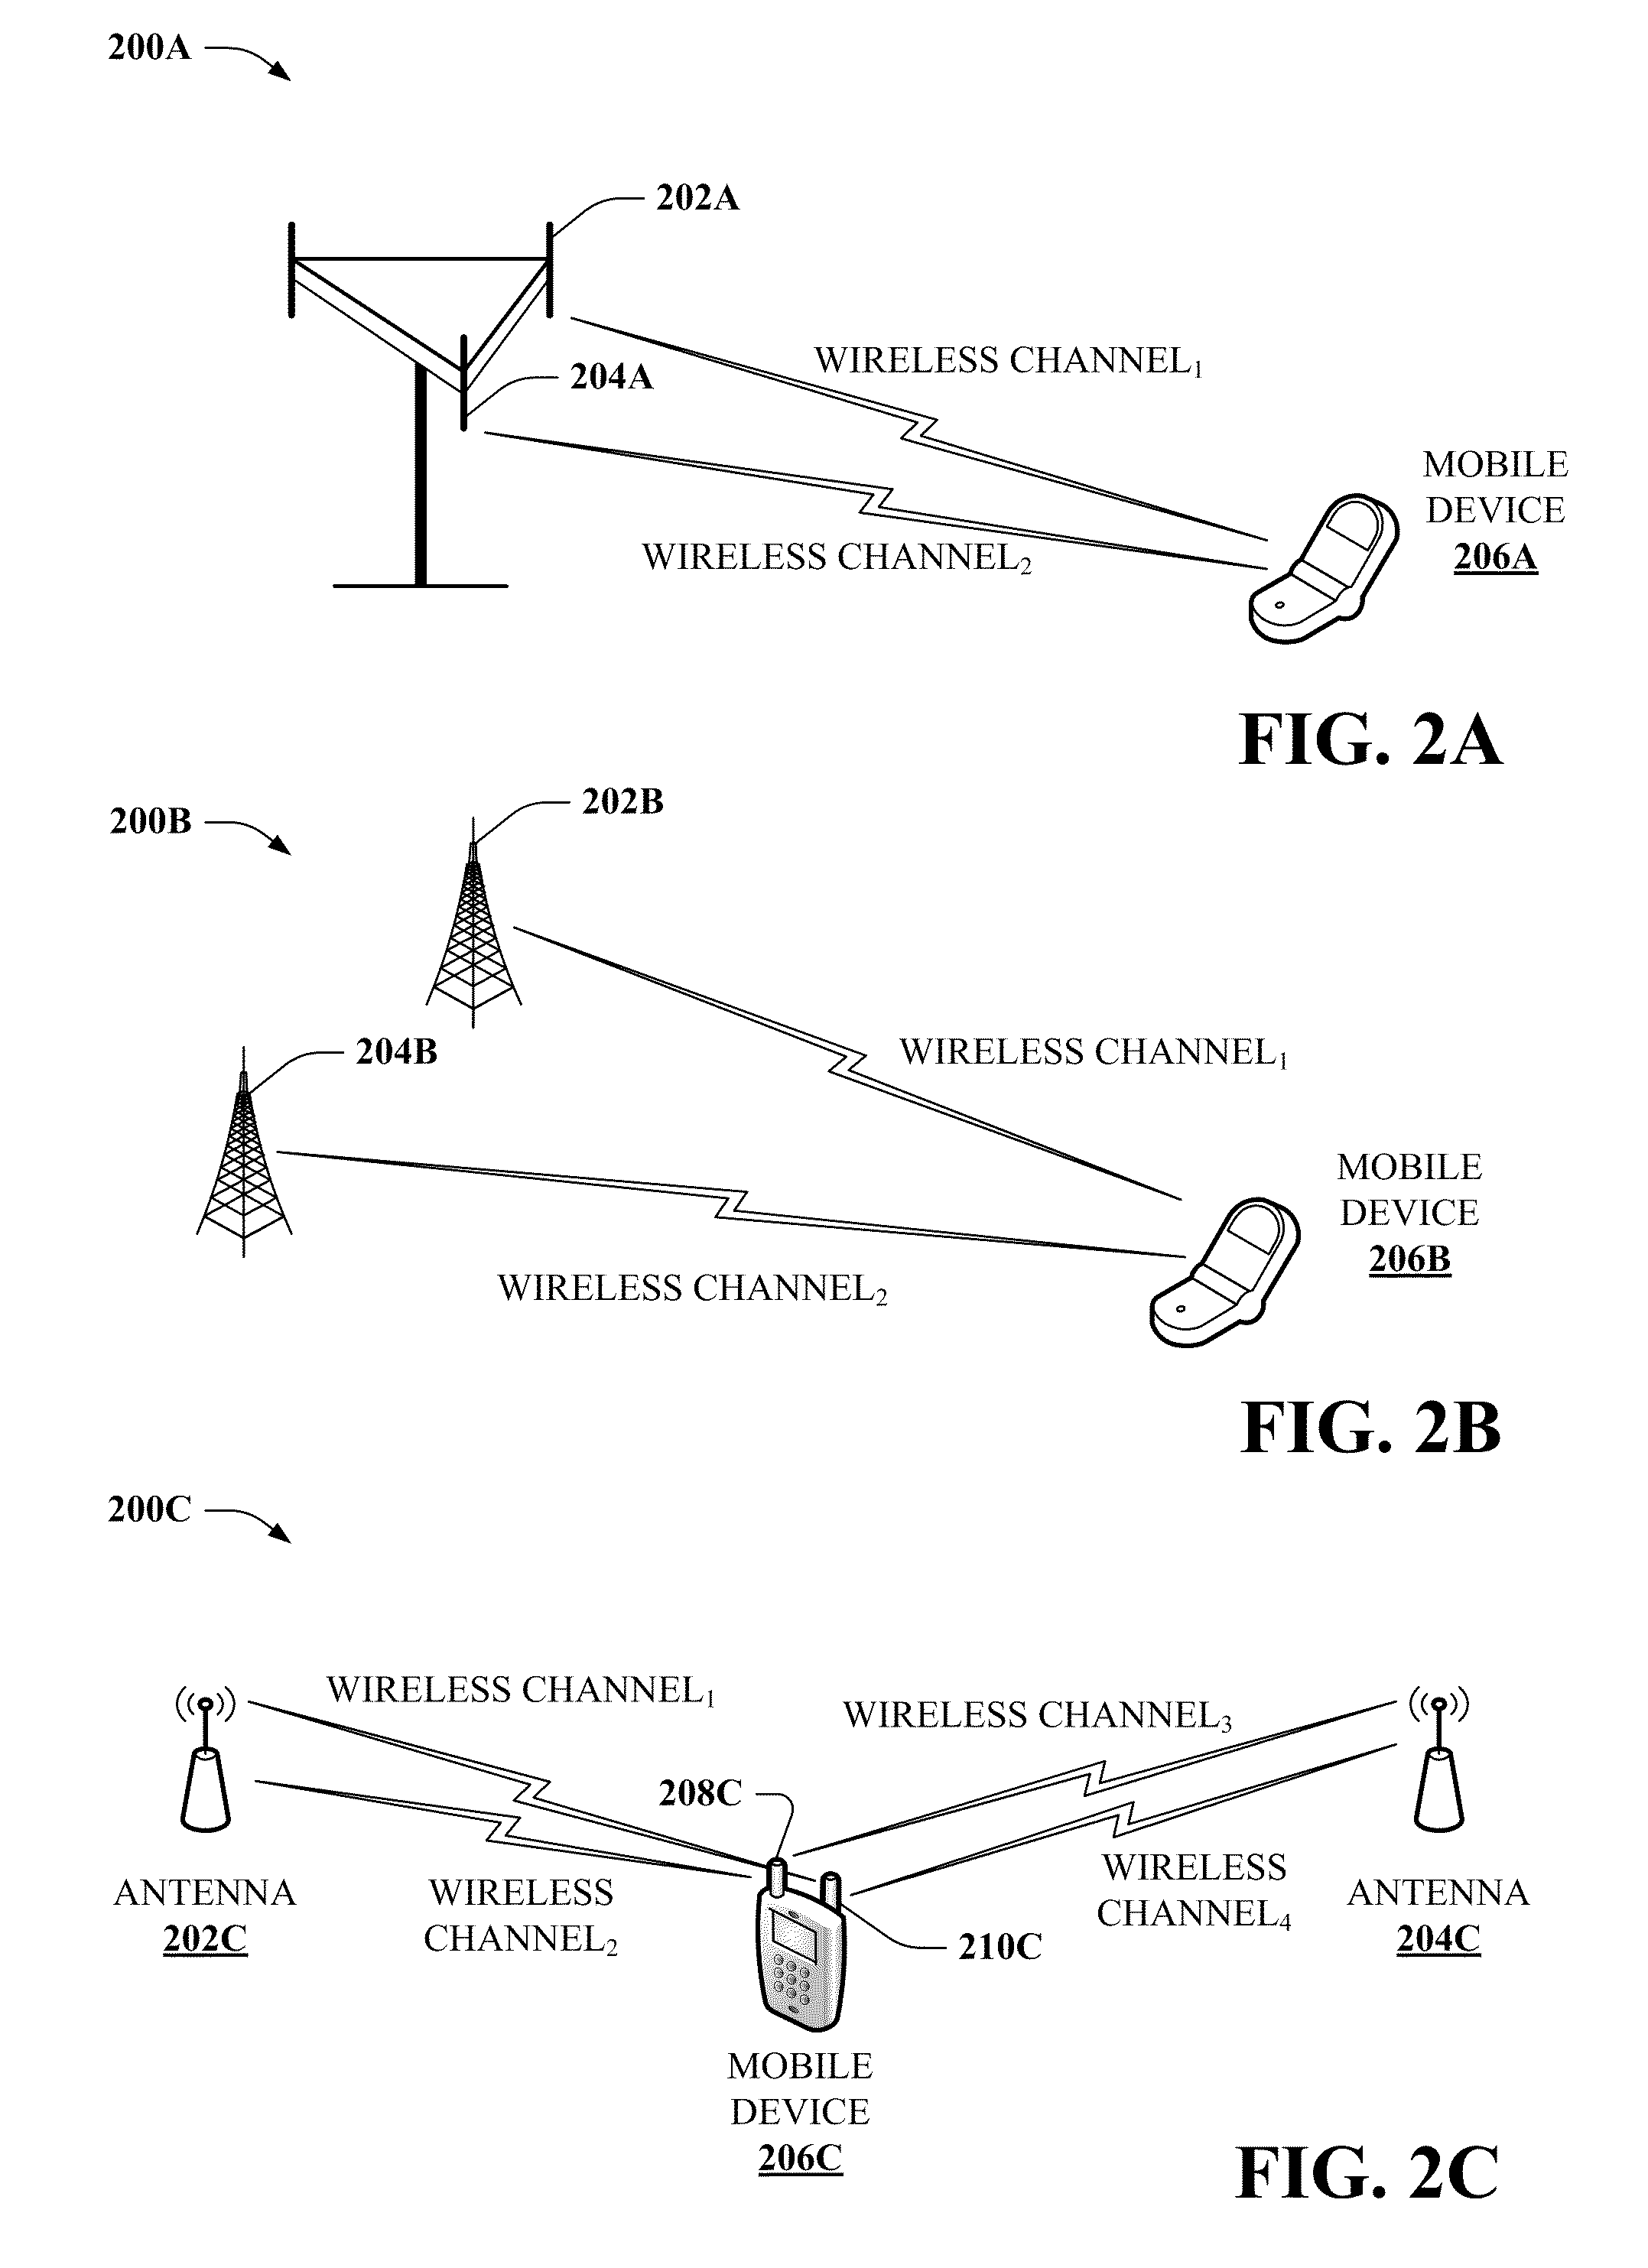 Multi-term demapping for multi-channel wireless communication